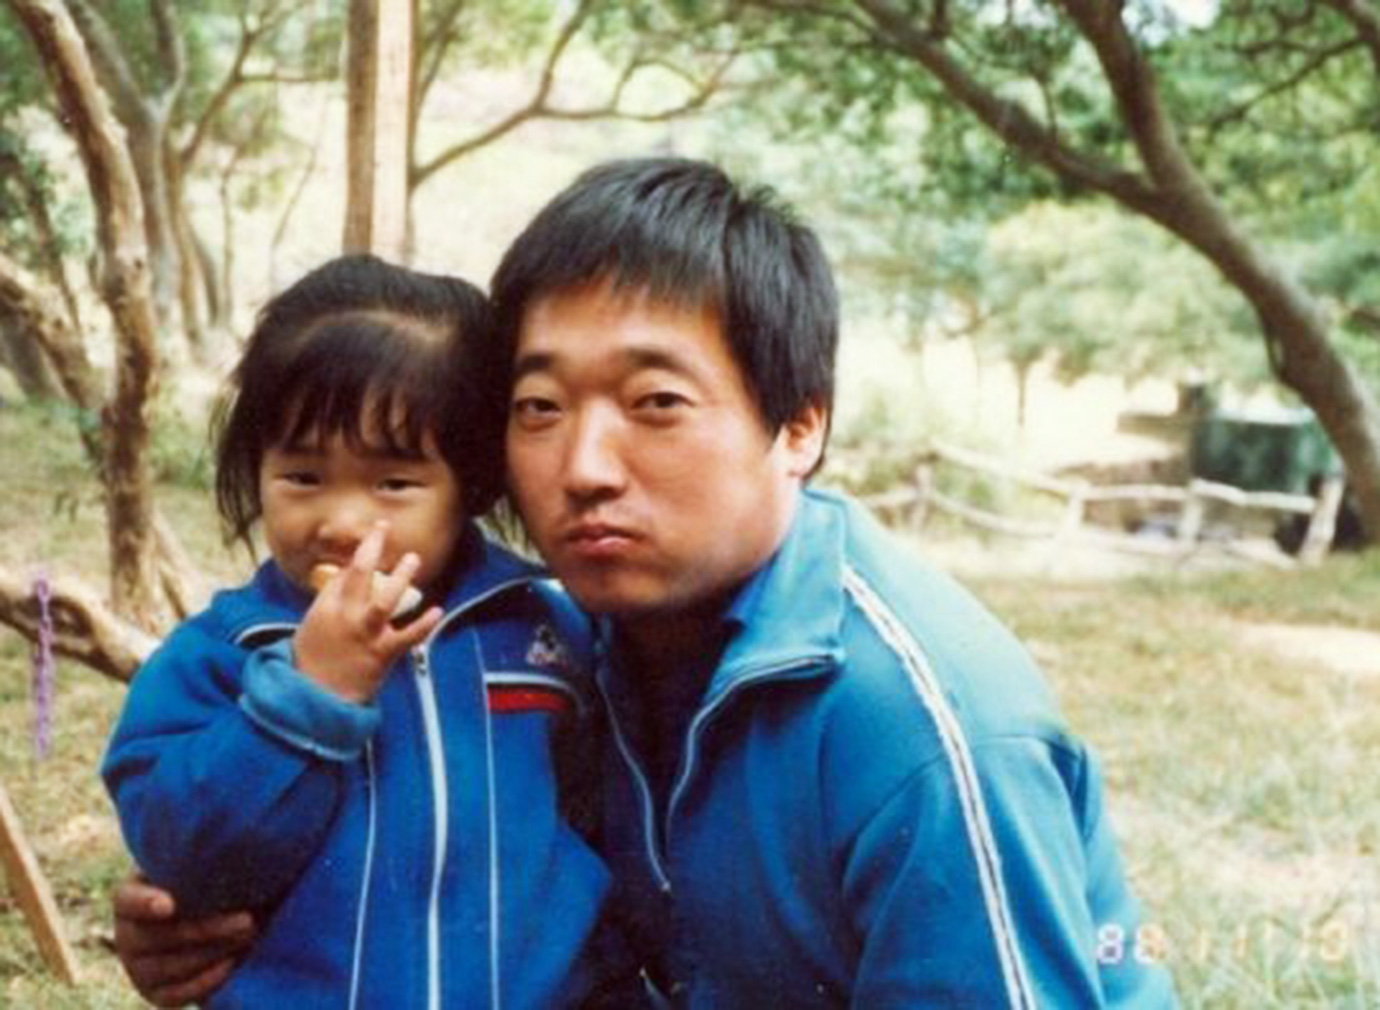 Iu-Luen Jeng and her father